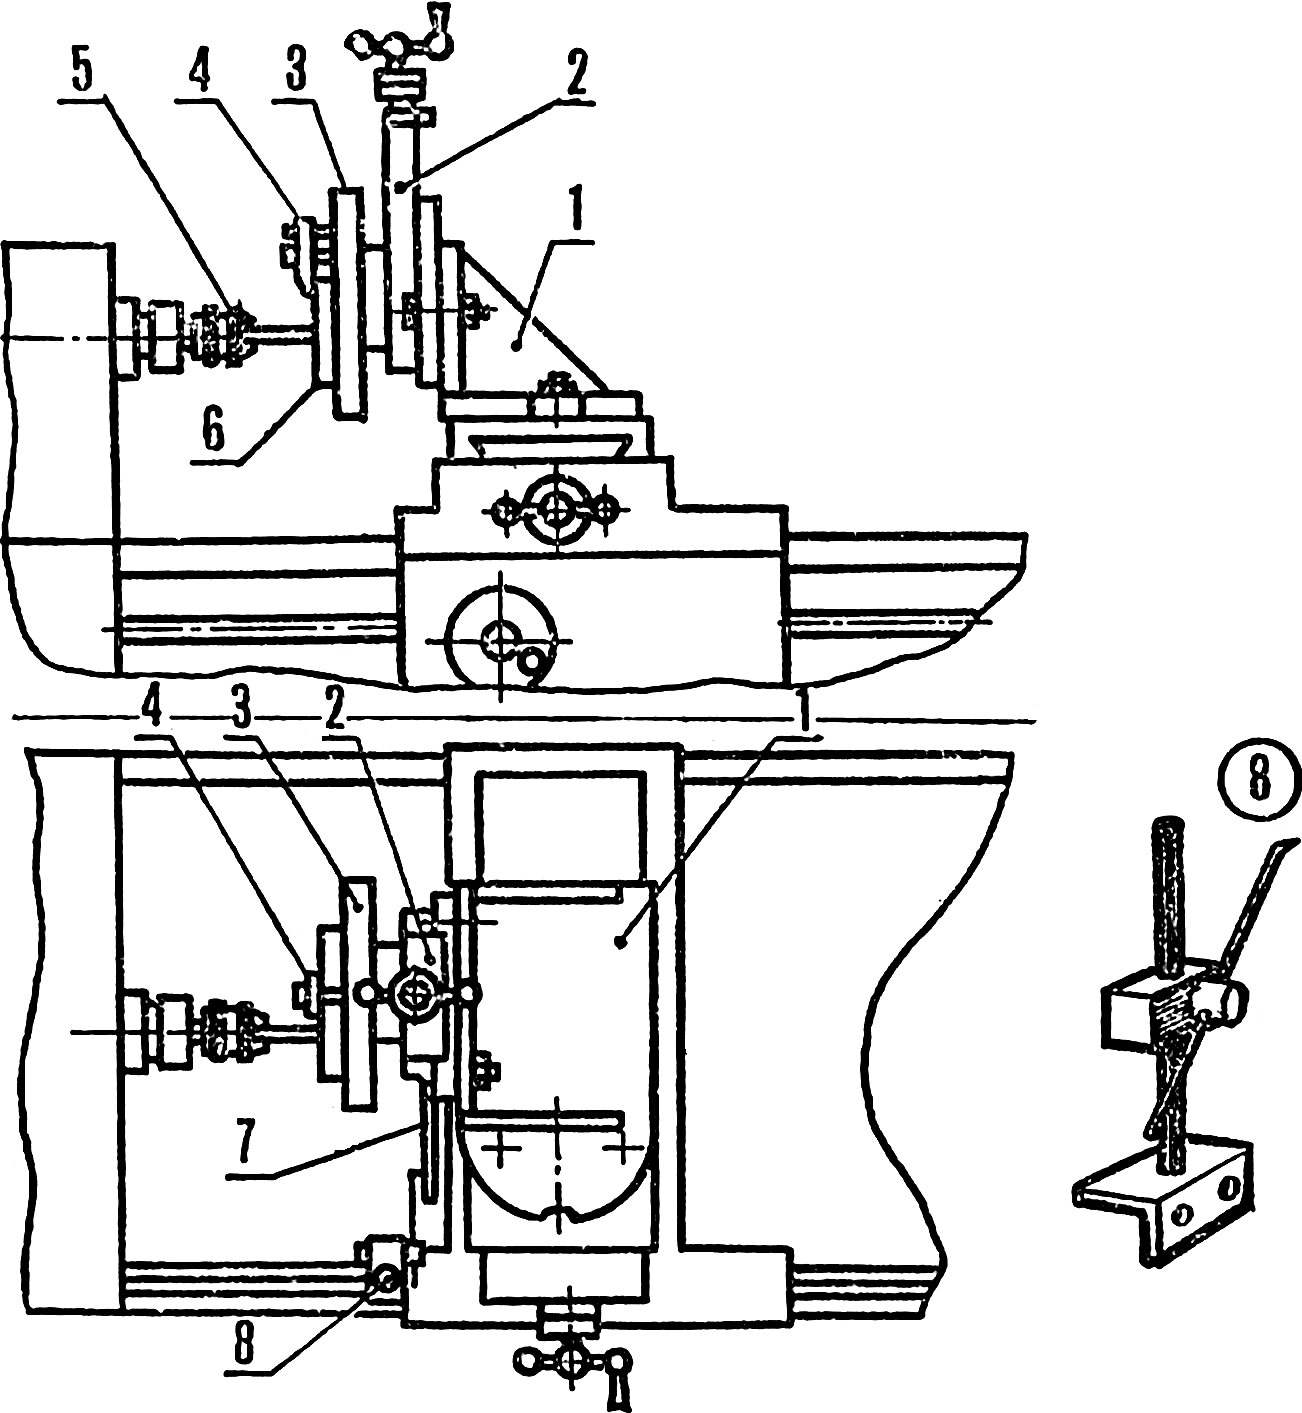 Fig. 1. Tooling to the lathe TV-4 for work cutters.